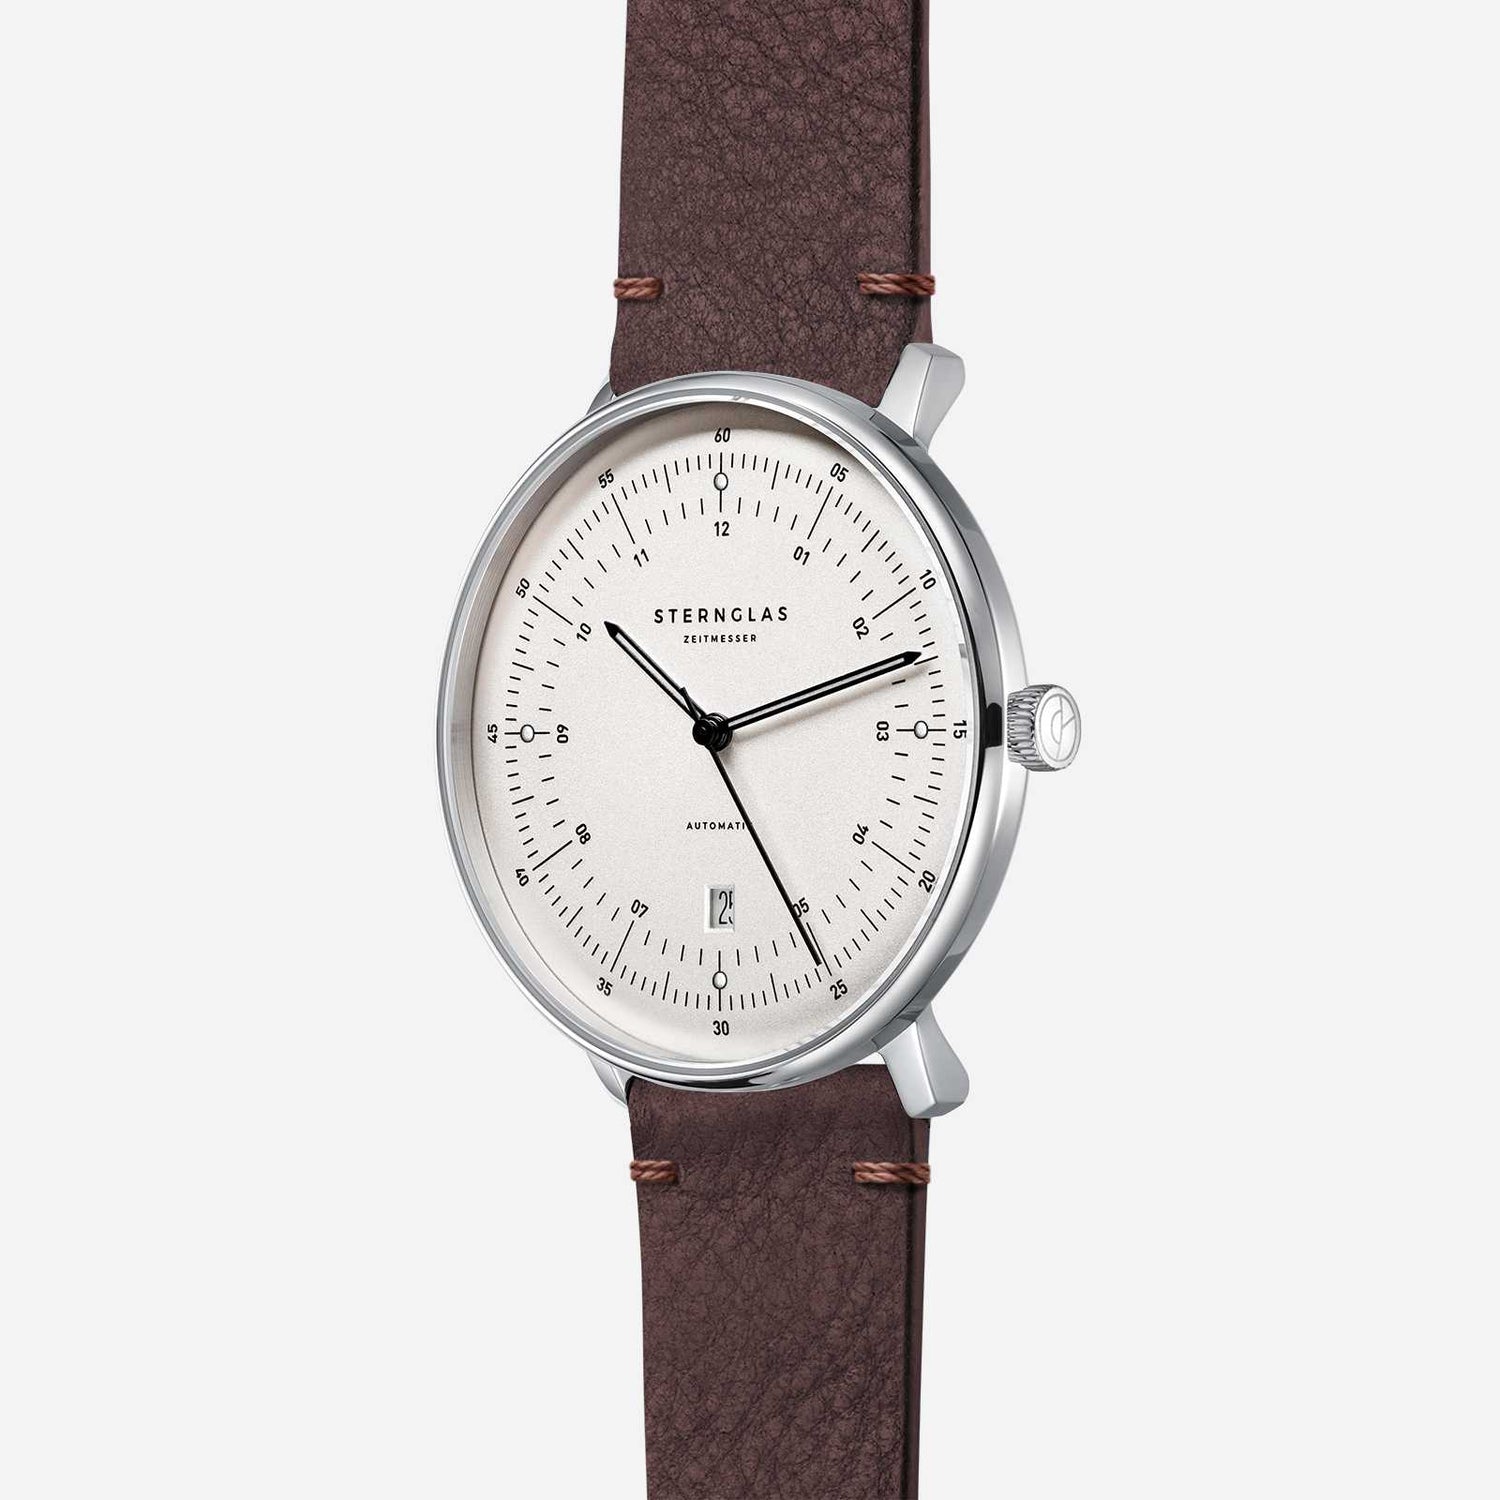 popup|Curved dial|The silvery satin-finished dial with fine curvature gives the model a noble vintage character.